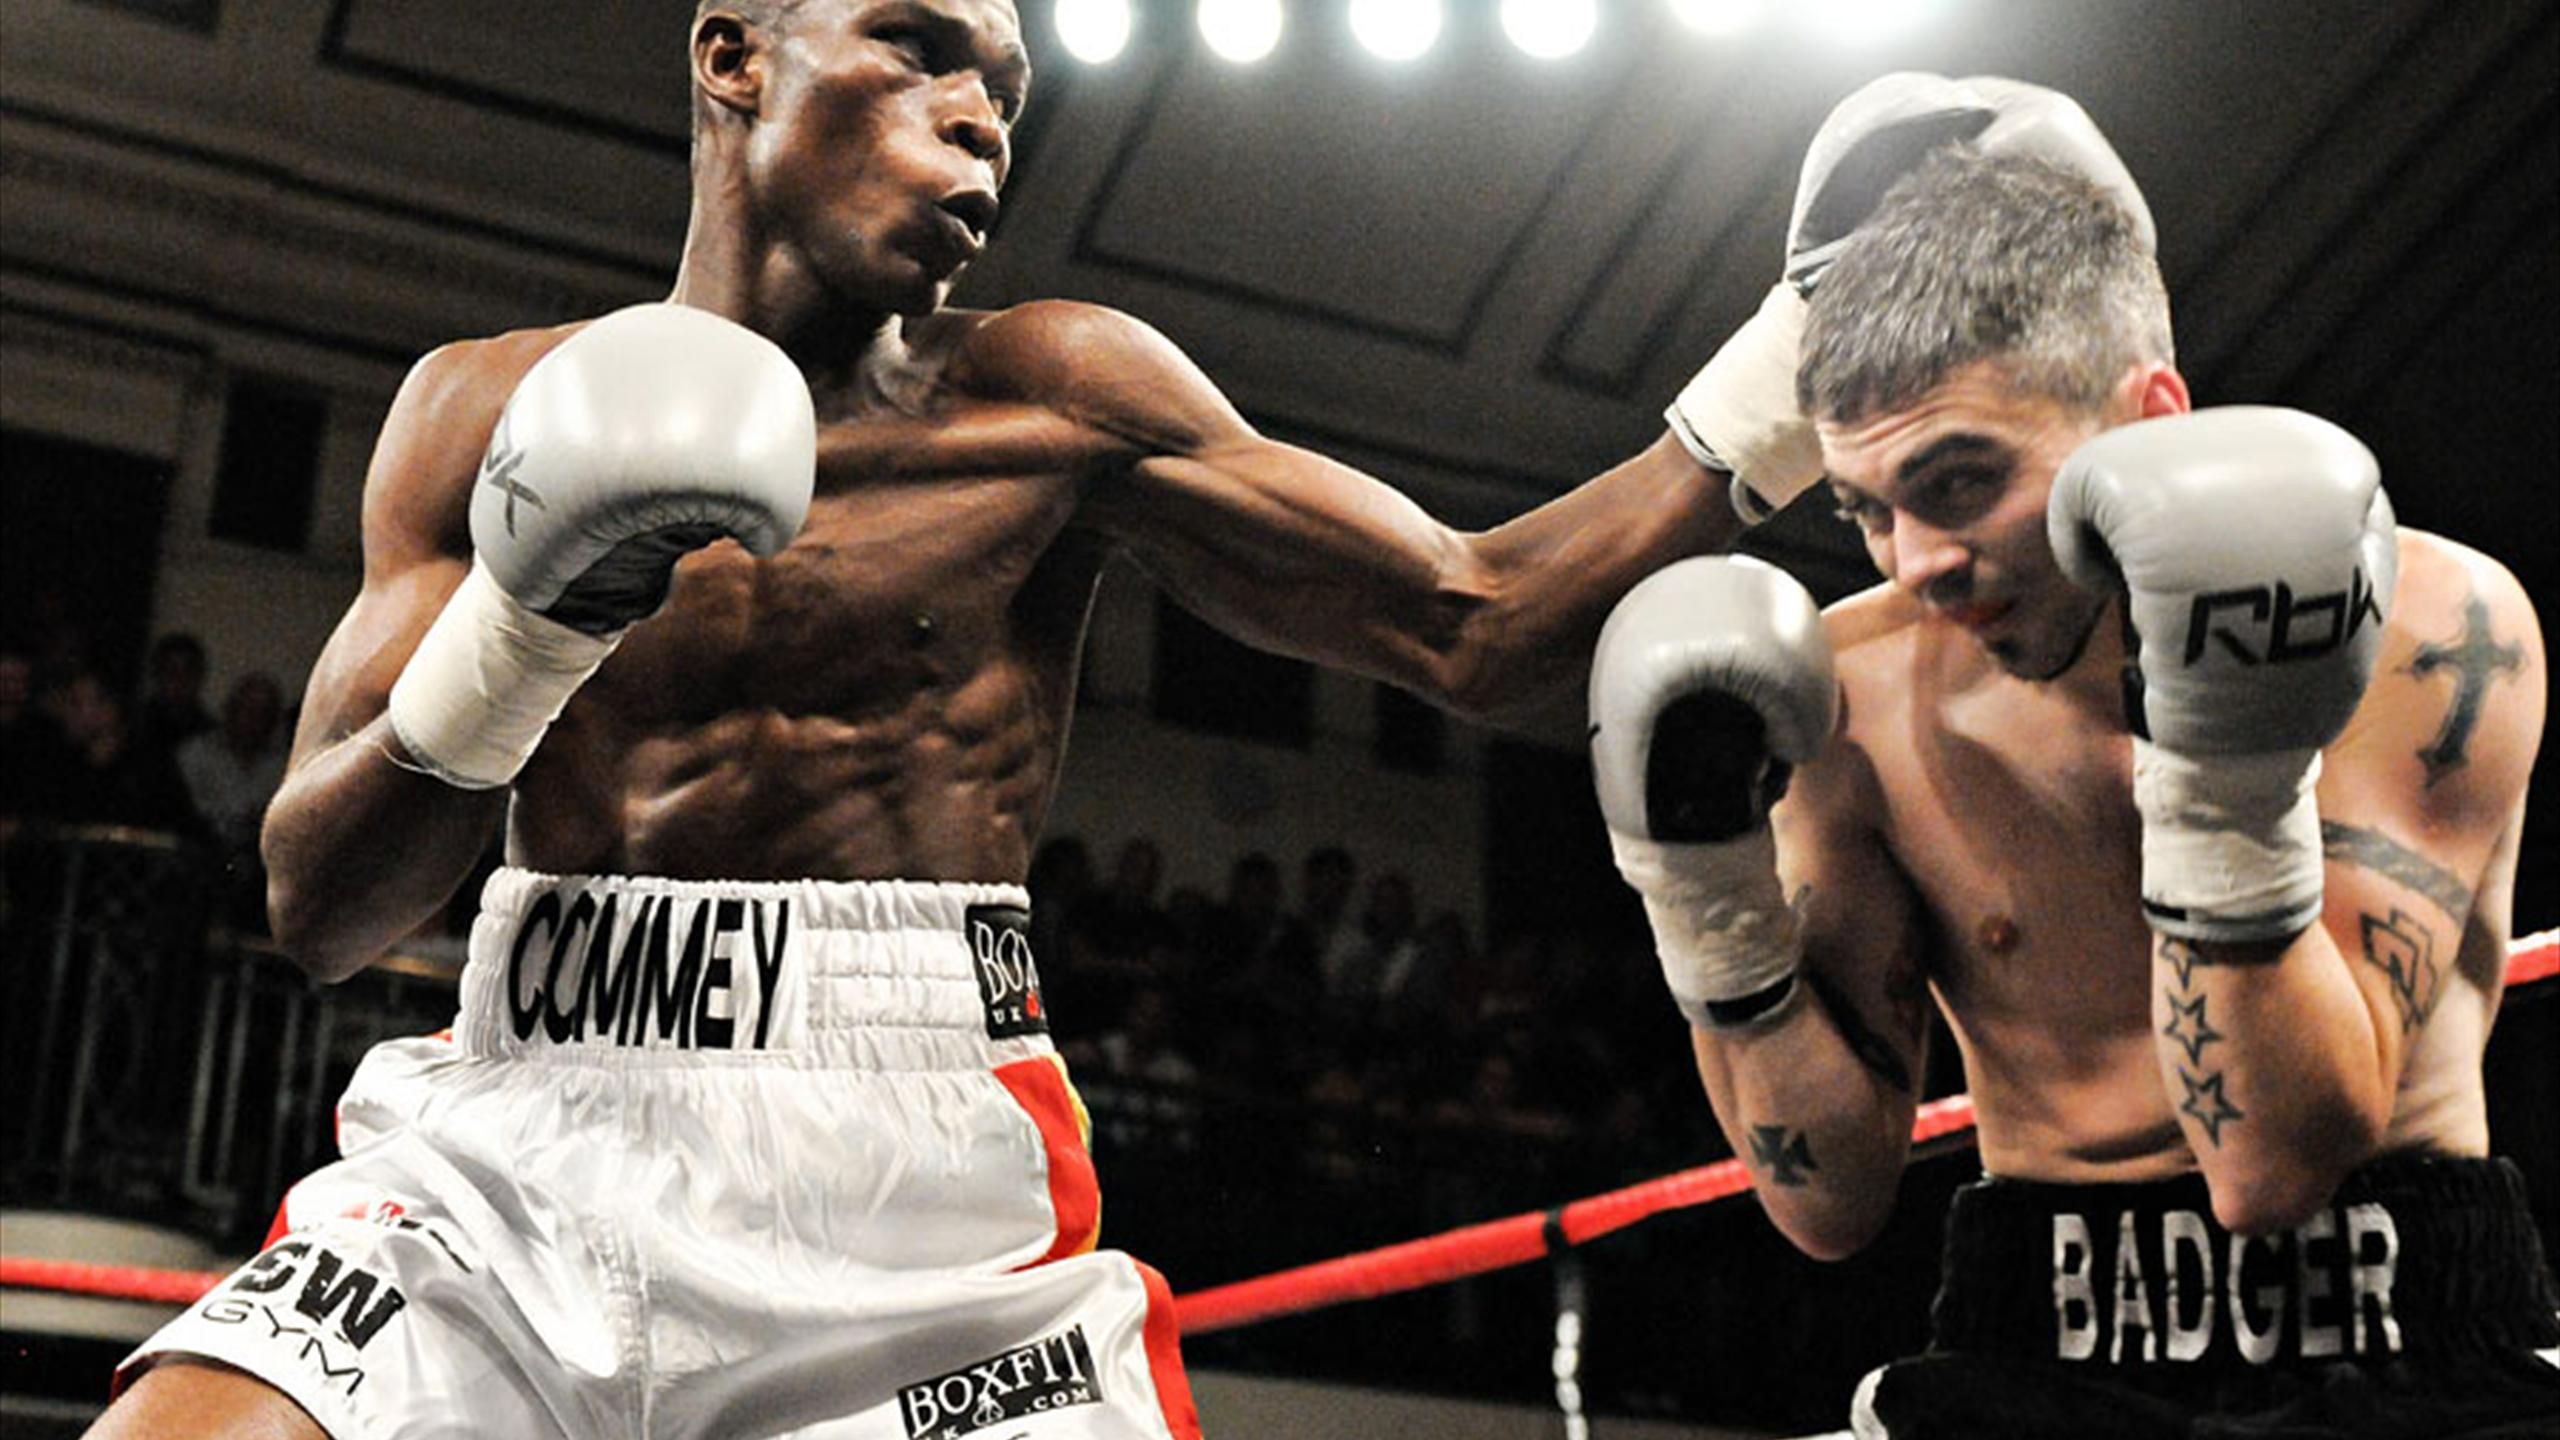 Commey tops bill at York Hall on July 13